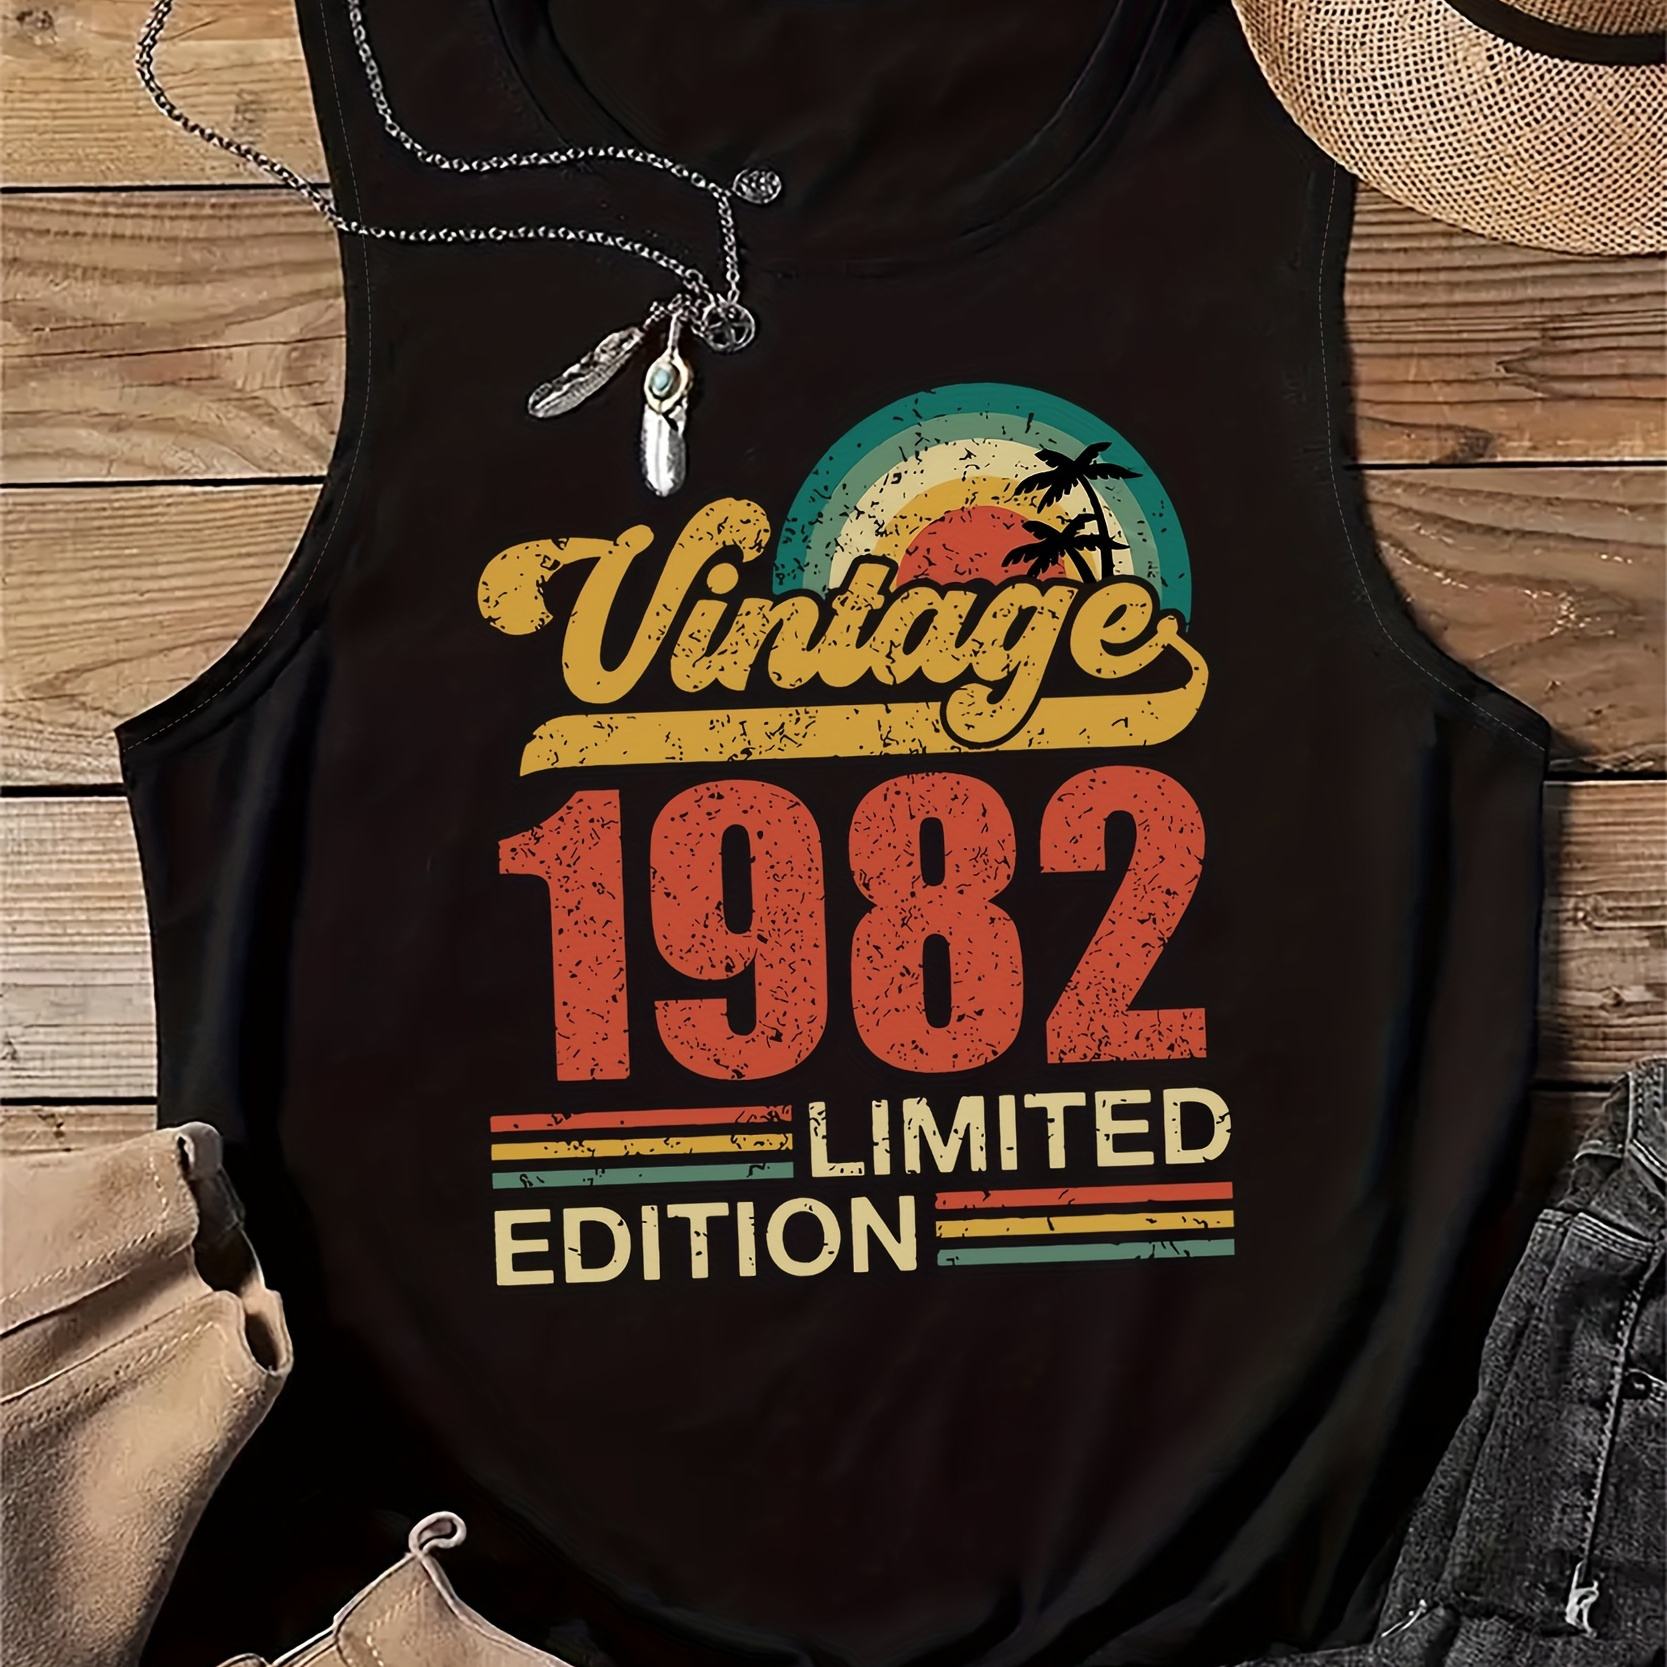 

1982 Vintage Letter Print Crew Neck Tank Top, Casual Sleeveless Tank Top For Summer, Women's Clothing